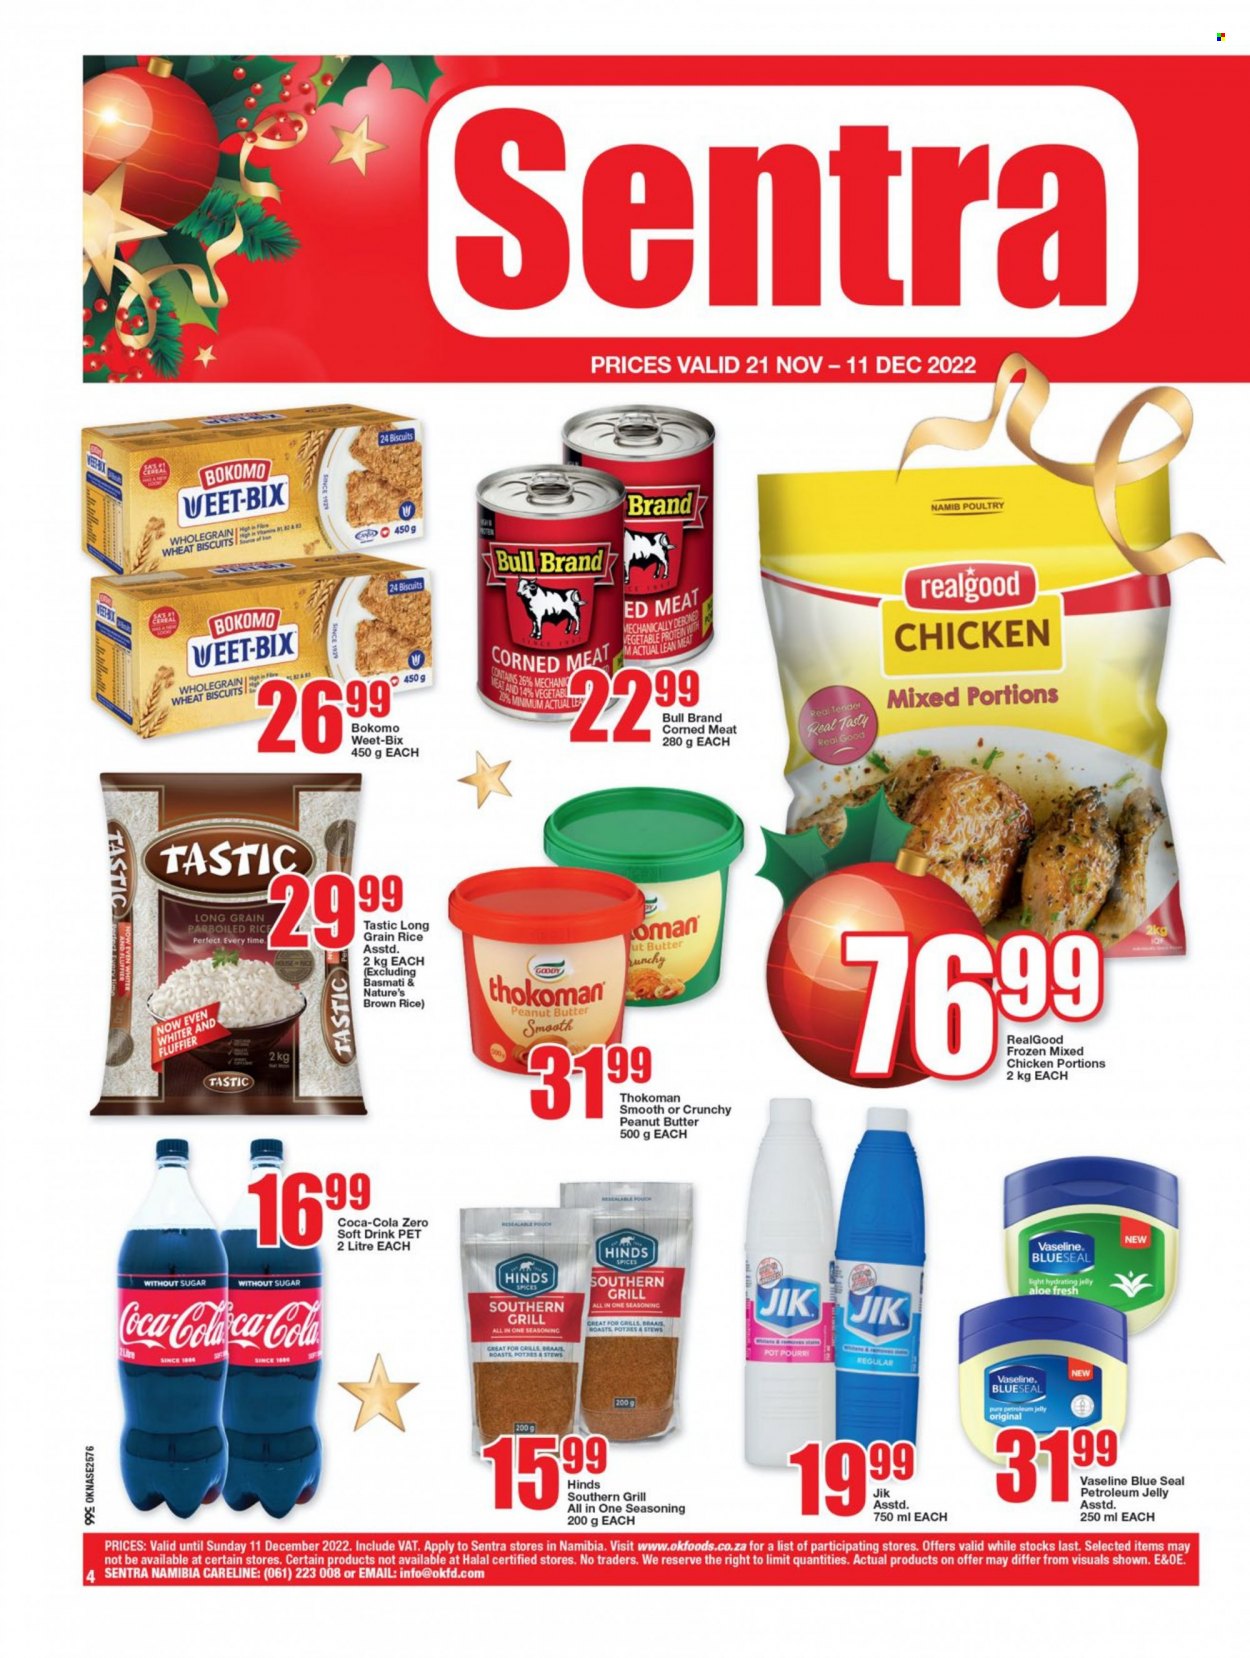 thumbnail - OK catalogue  - 21/11/2022 - 11/12/2022 - Sales products - cereal bar, biscuit, sugar, corned meat, Weet-Bix, basmati rice, brown rice, rice, parboiled rice, Tastic, long grain rice, spice, Hinds, peanut butter, Coca-Cola, soft drink, Coca-Cola zero. Page 3.